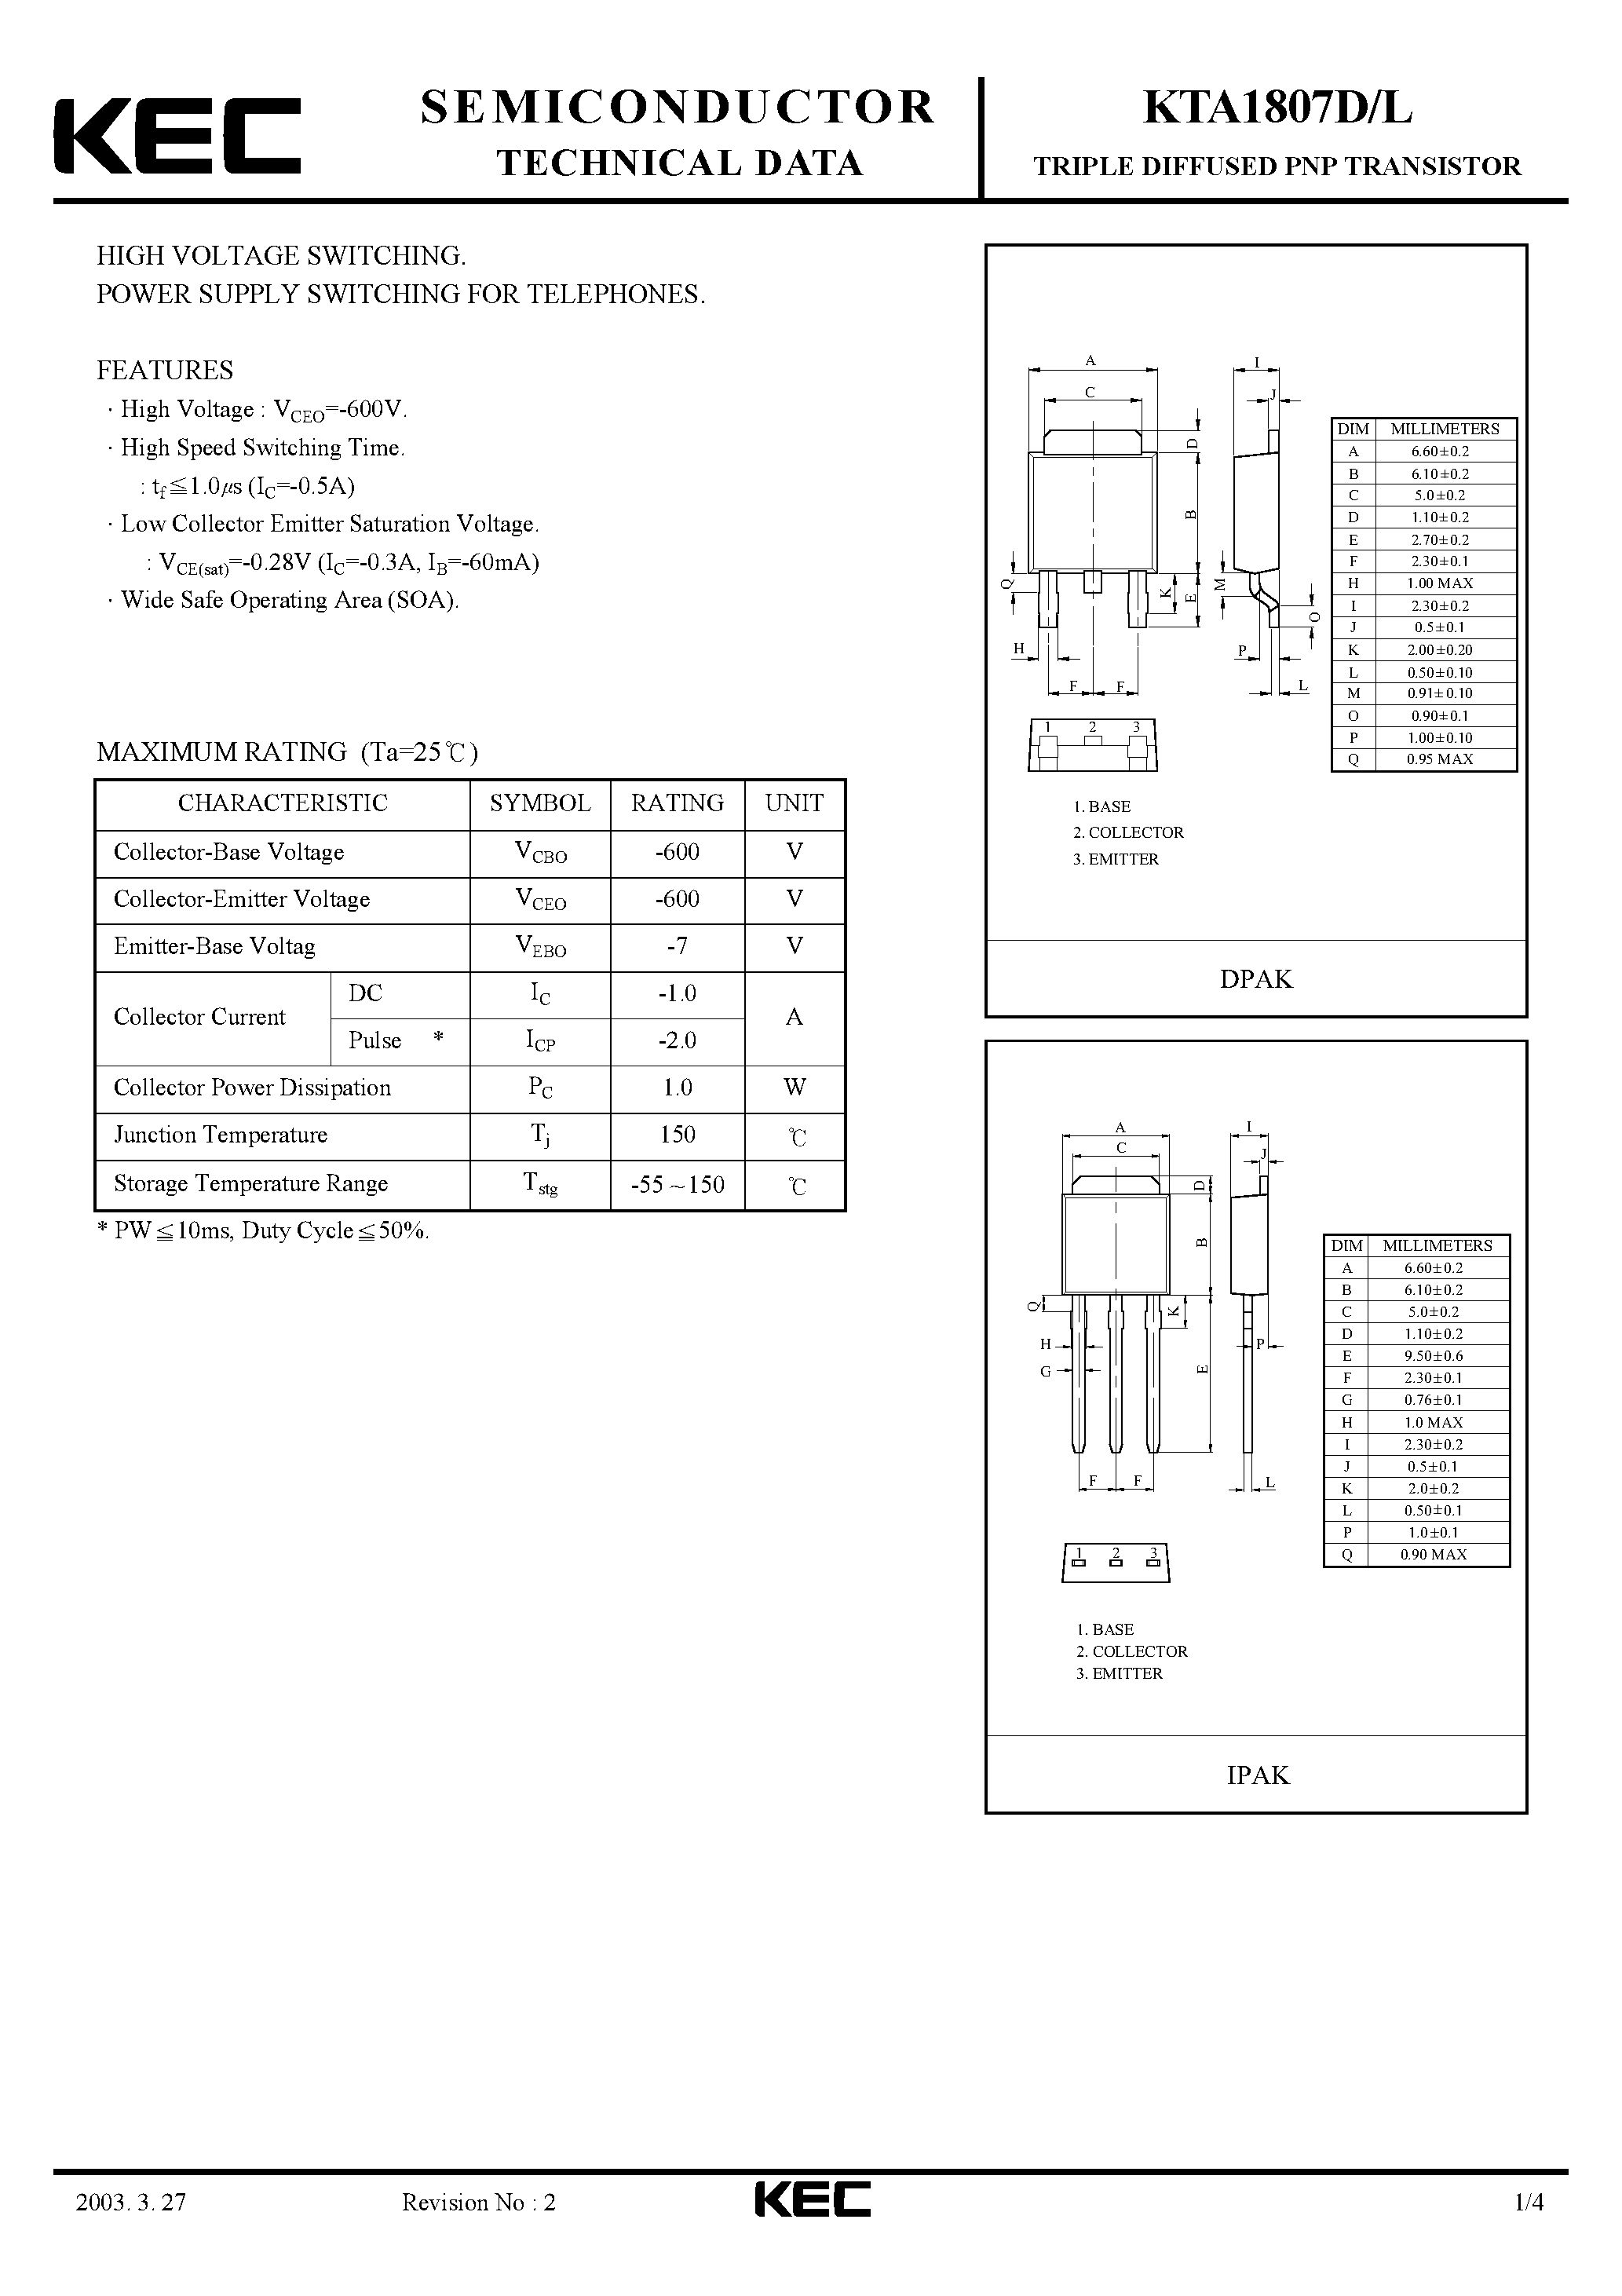 Datasheet KTA1807L - TRIPLE DIFFUSED PNP TRANSISTOR(HIGH VOLTAGE SWITCHING POWER SUPPLY SWITCHING FOR TELEPHONES) page 1